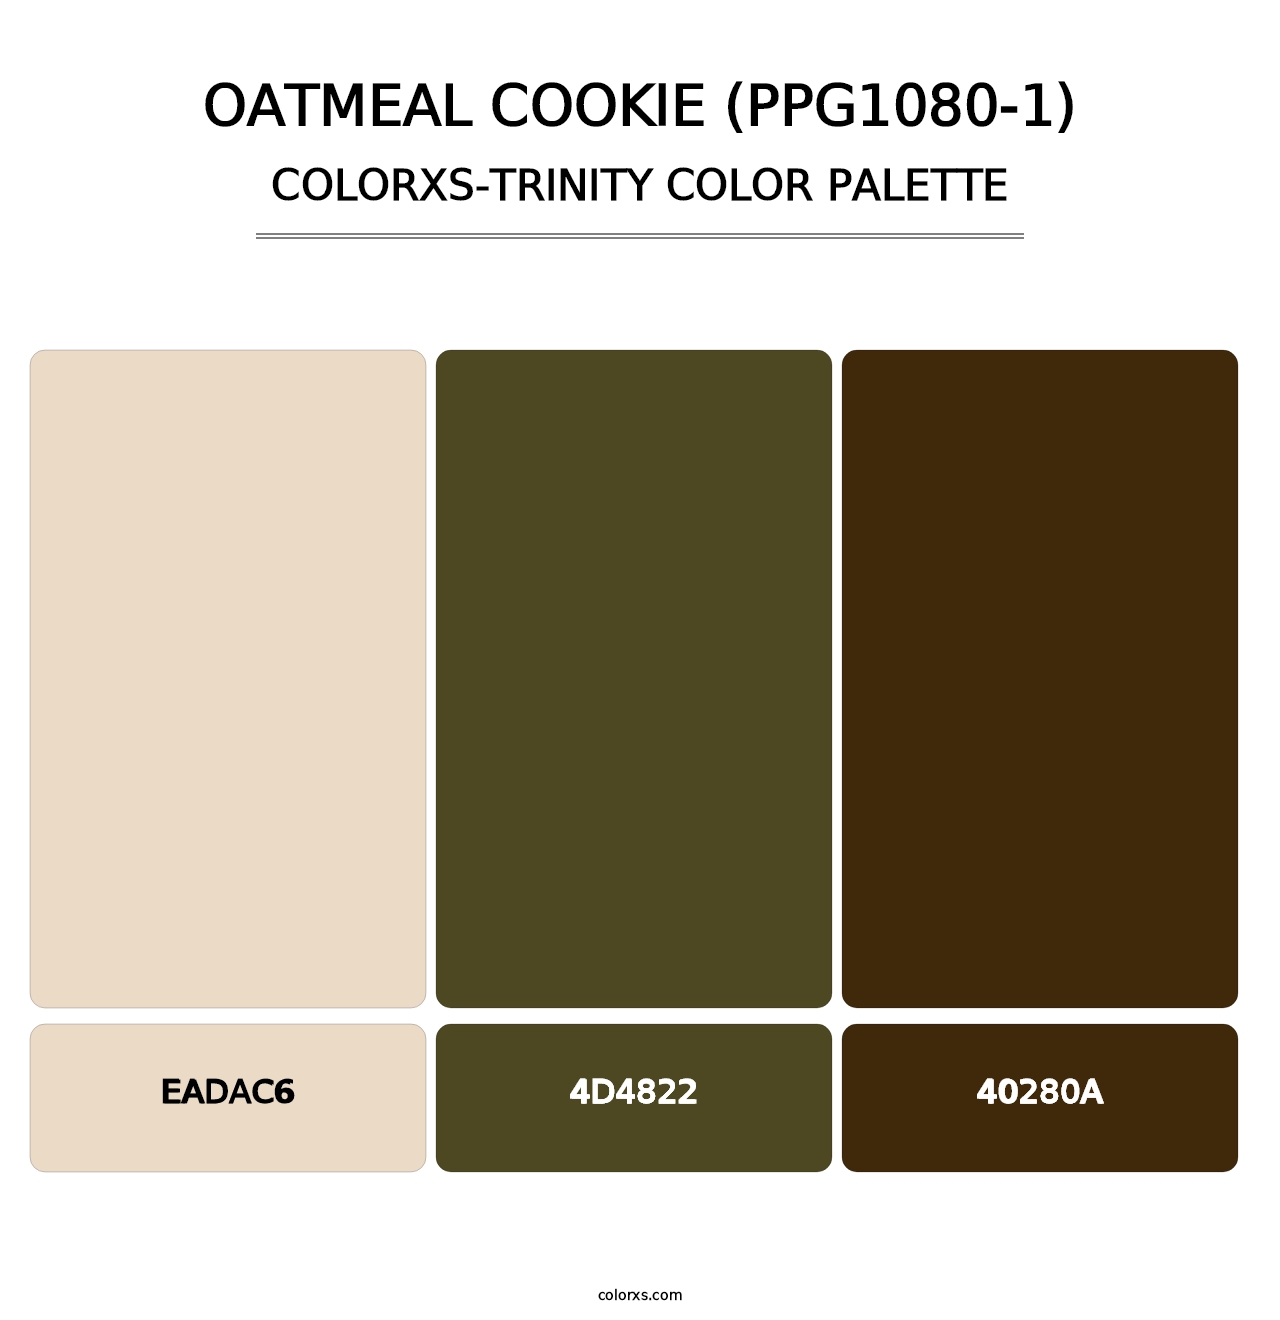 Oatmeal Cookie (PPG1080-1) - Colorxs Trinity Palette